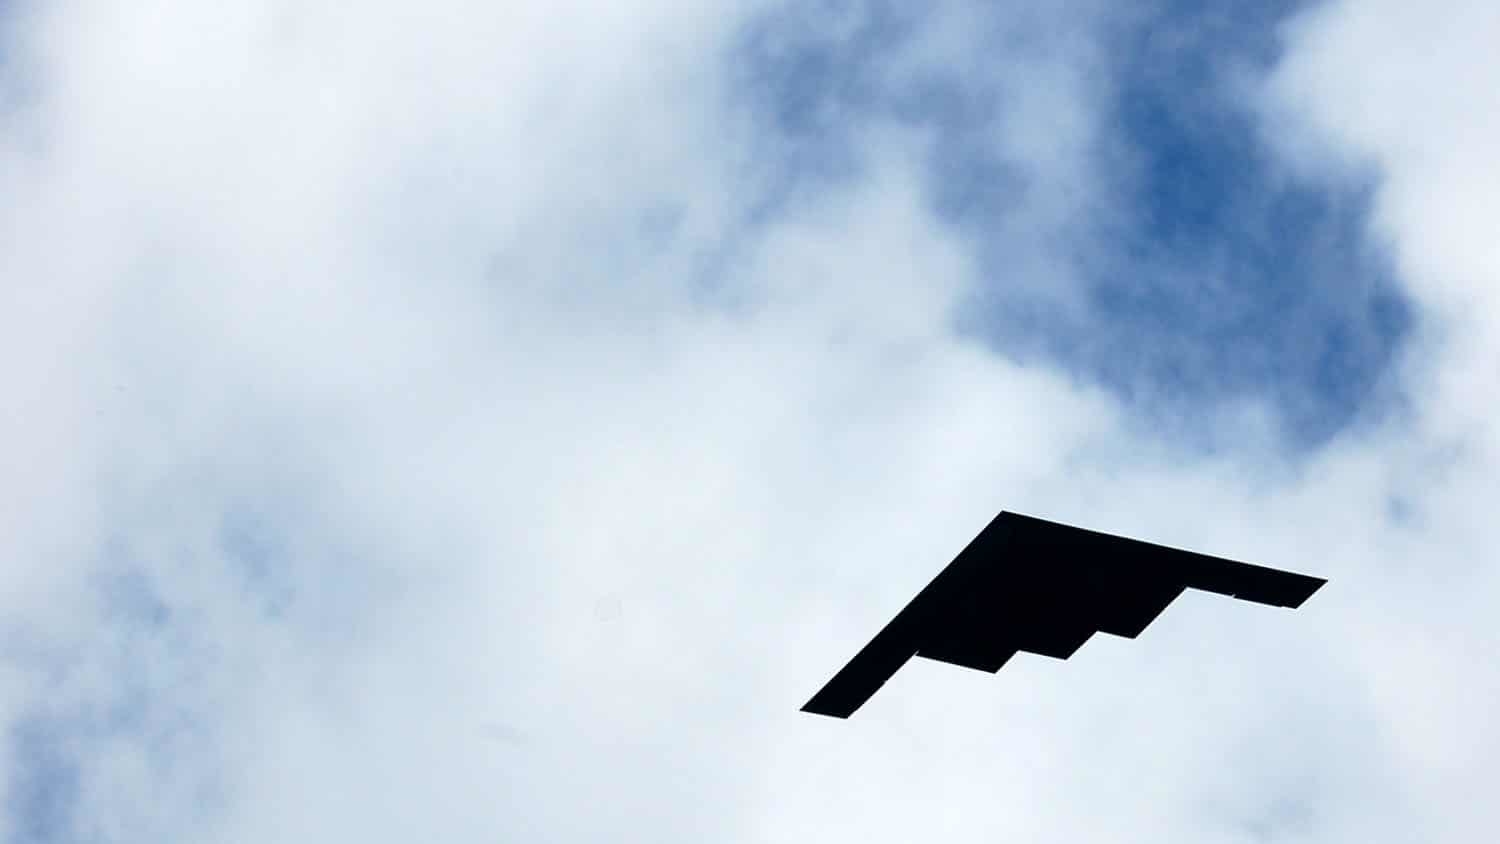 A B-2 Spirit (stealth) bomber is silhouetted against the clouds.